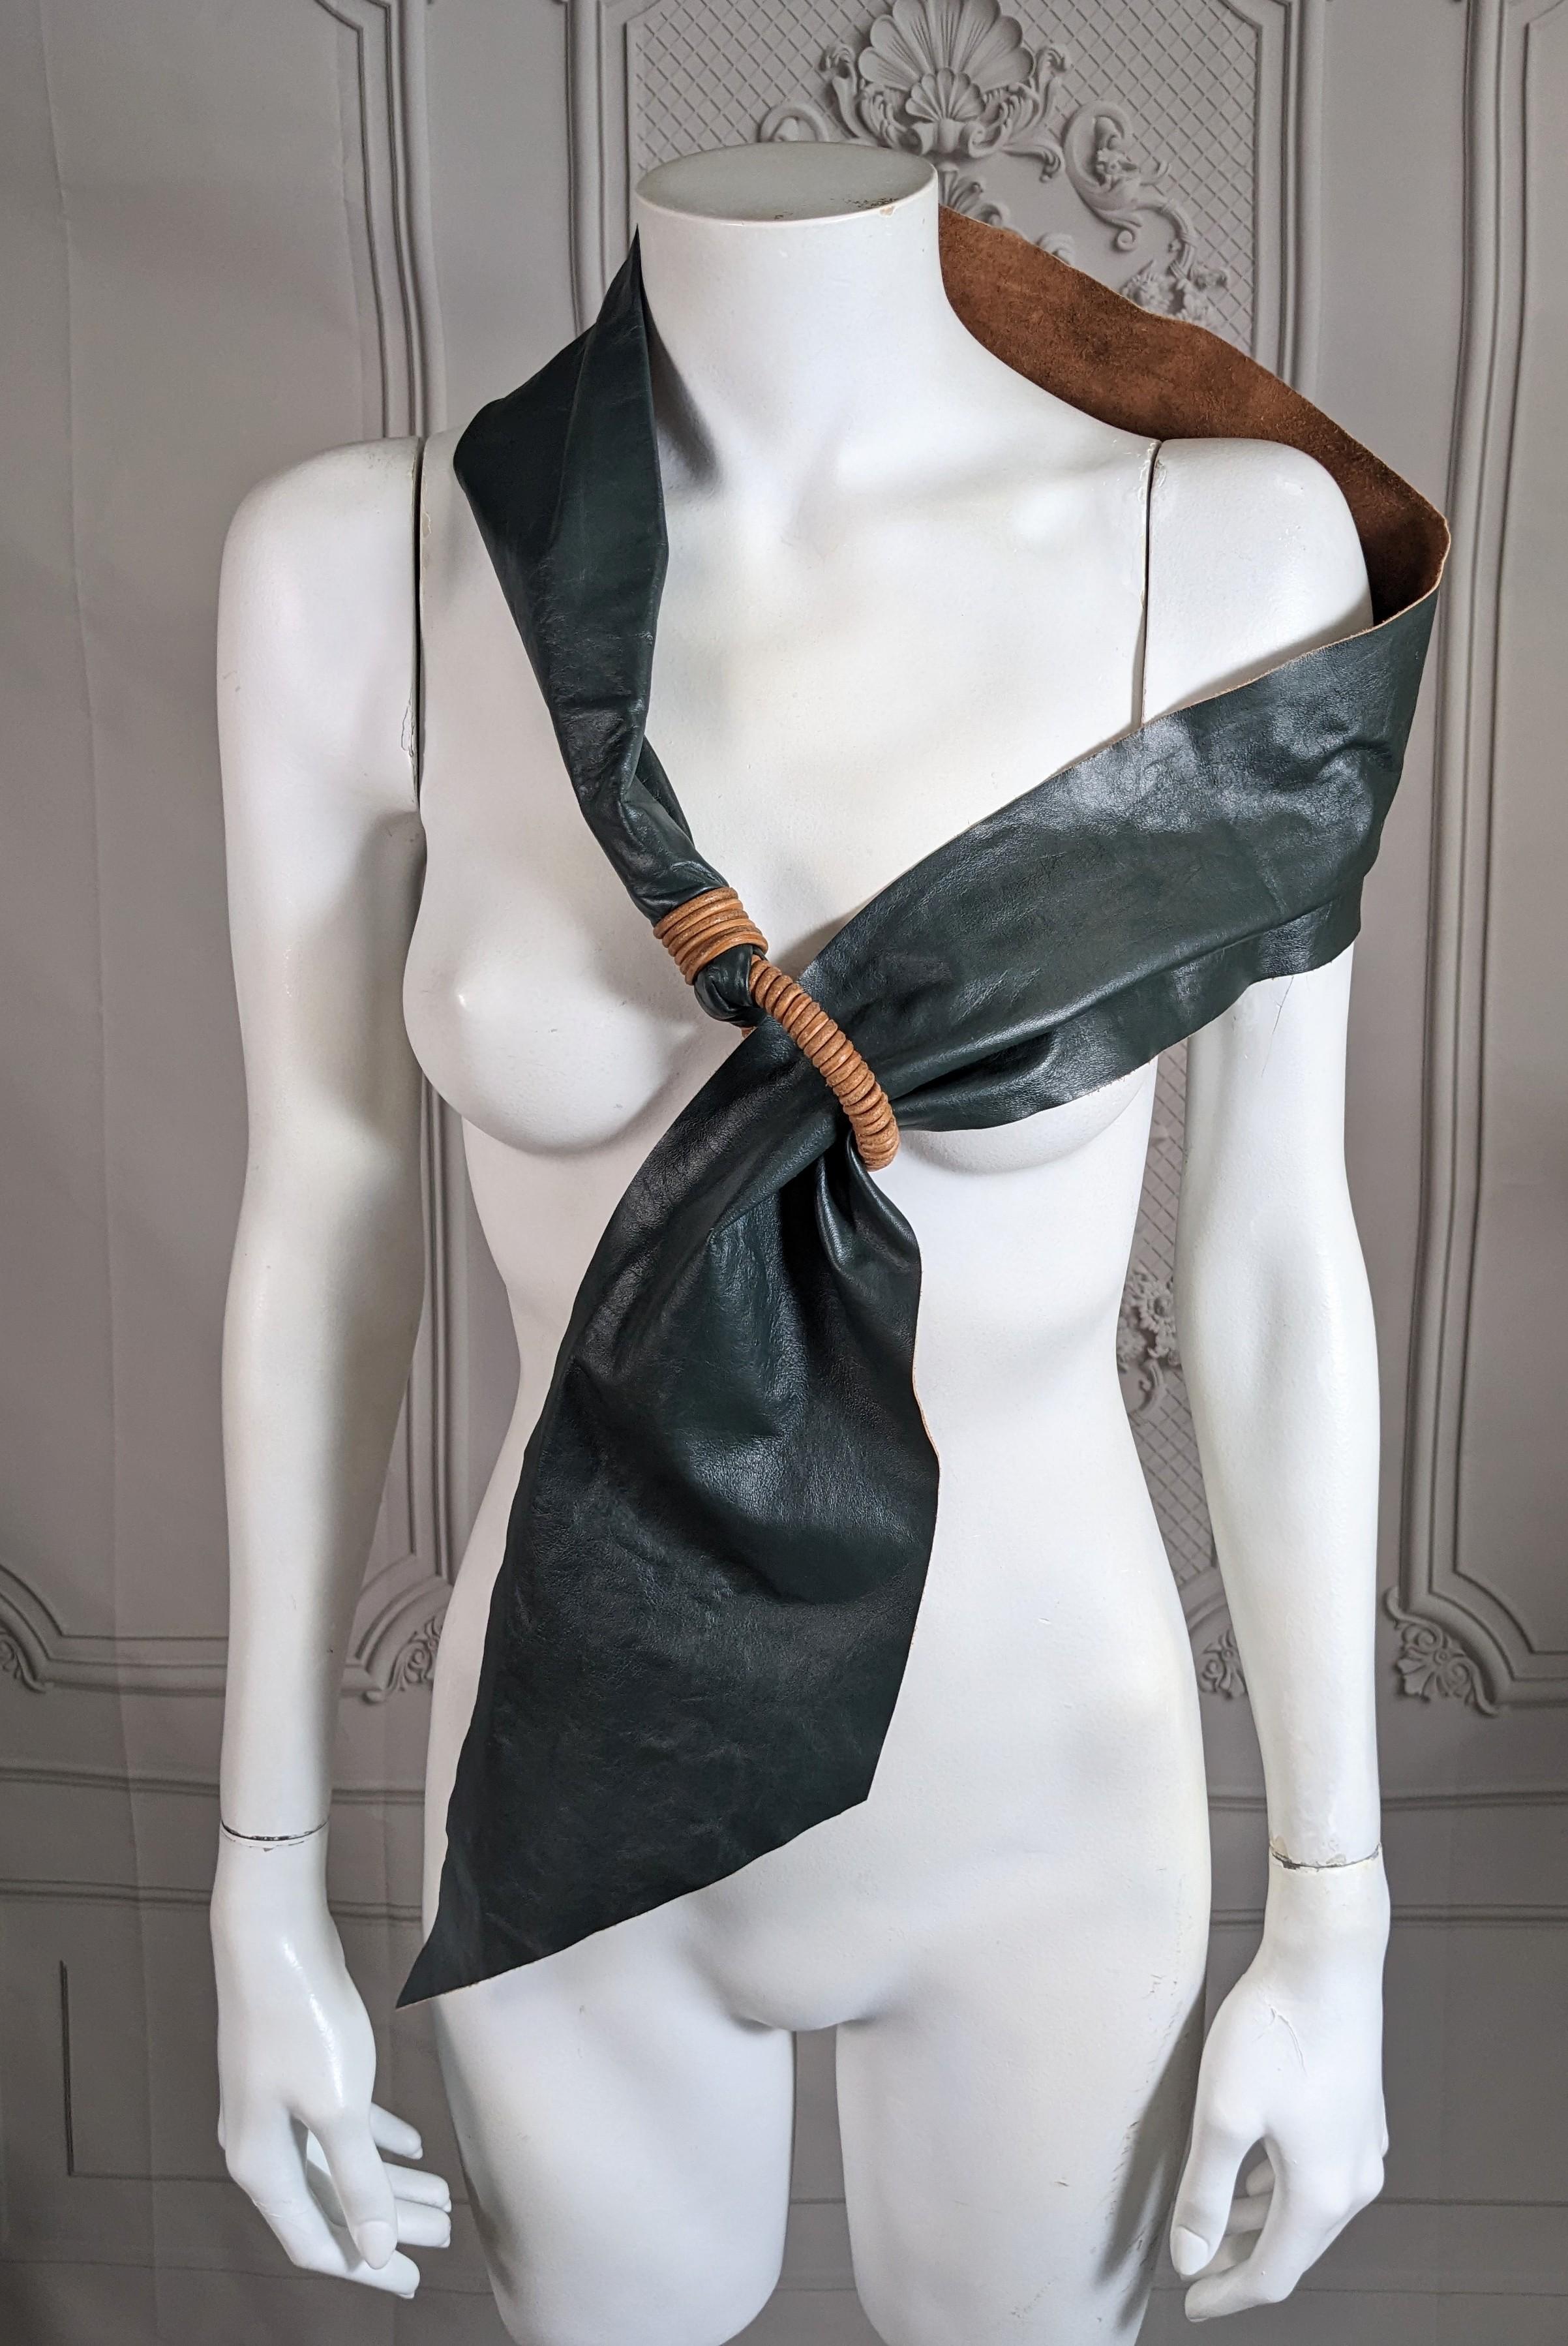 Extravagant Glazed Leather Sash Belt In Excellent Condition For Sale In New York, NY